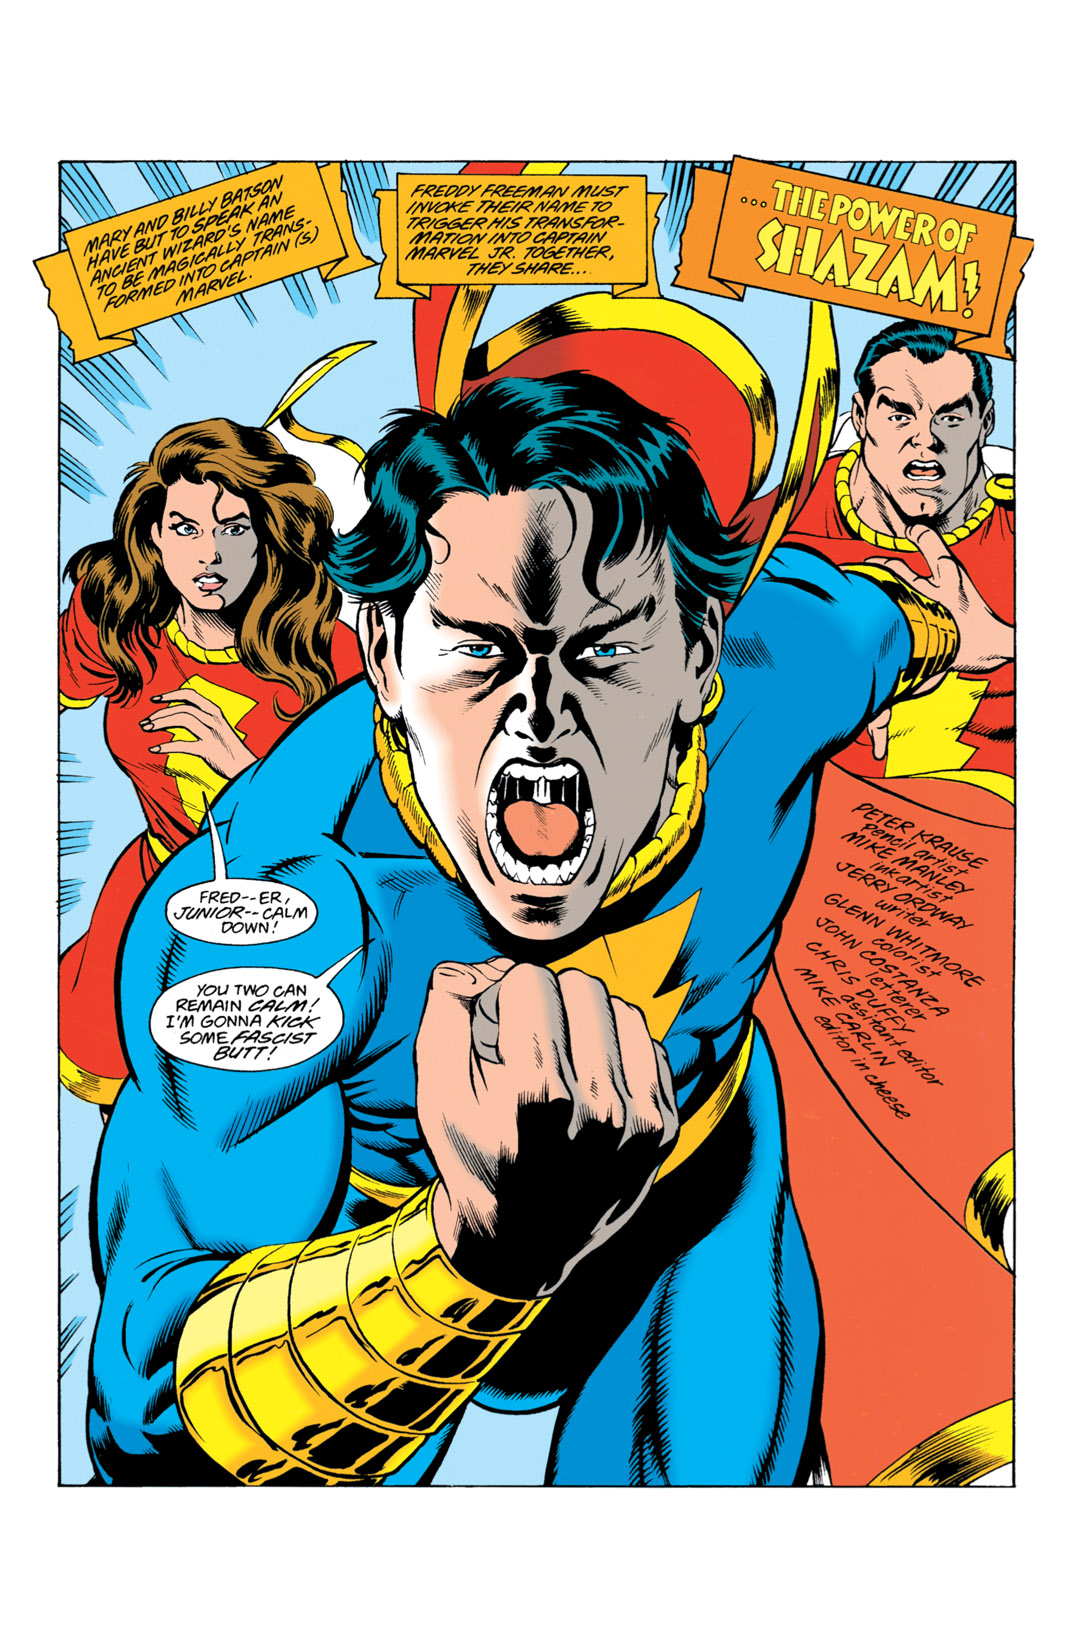 Read online The Power of SHAZAM! comic -  Issue #9 - 2